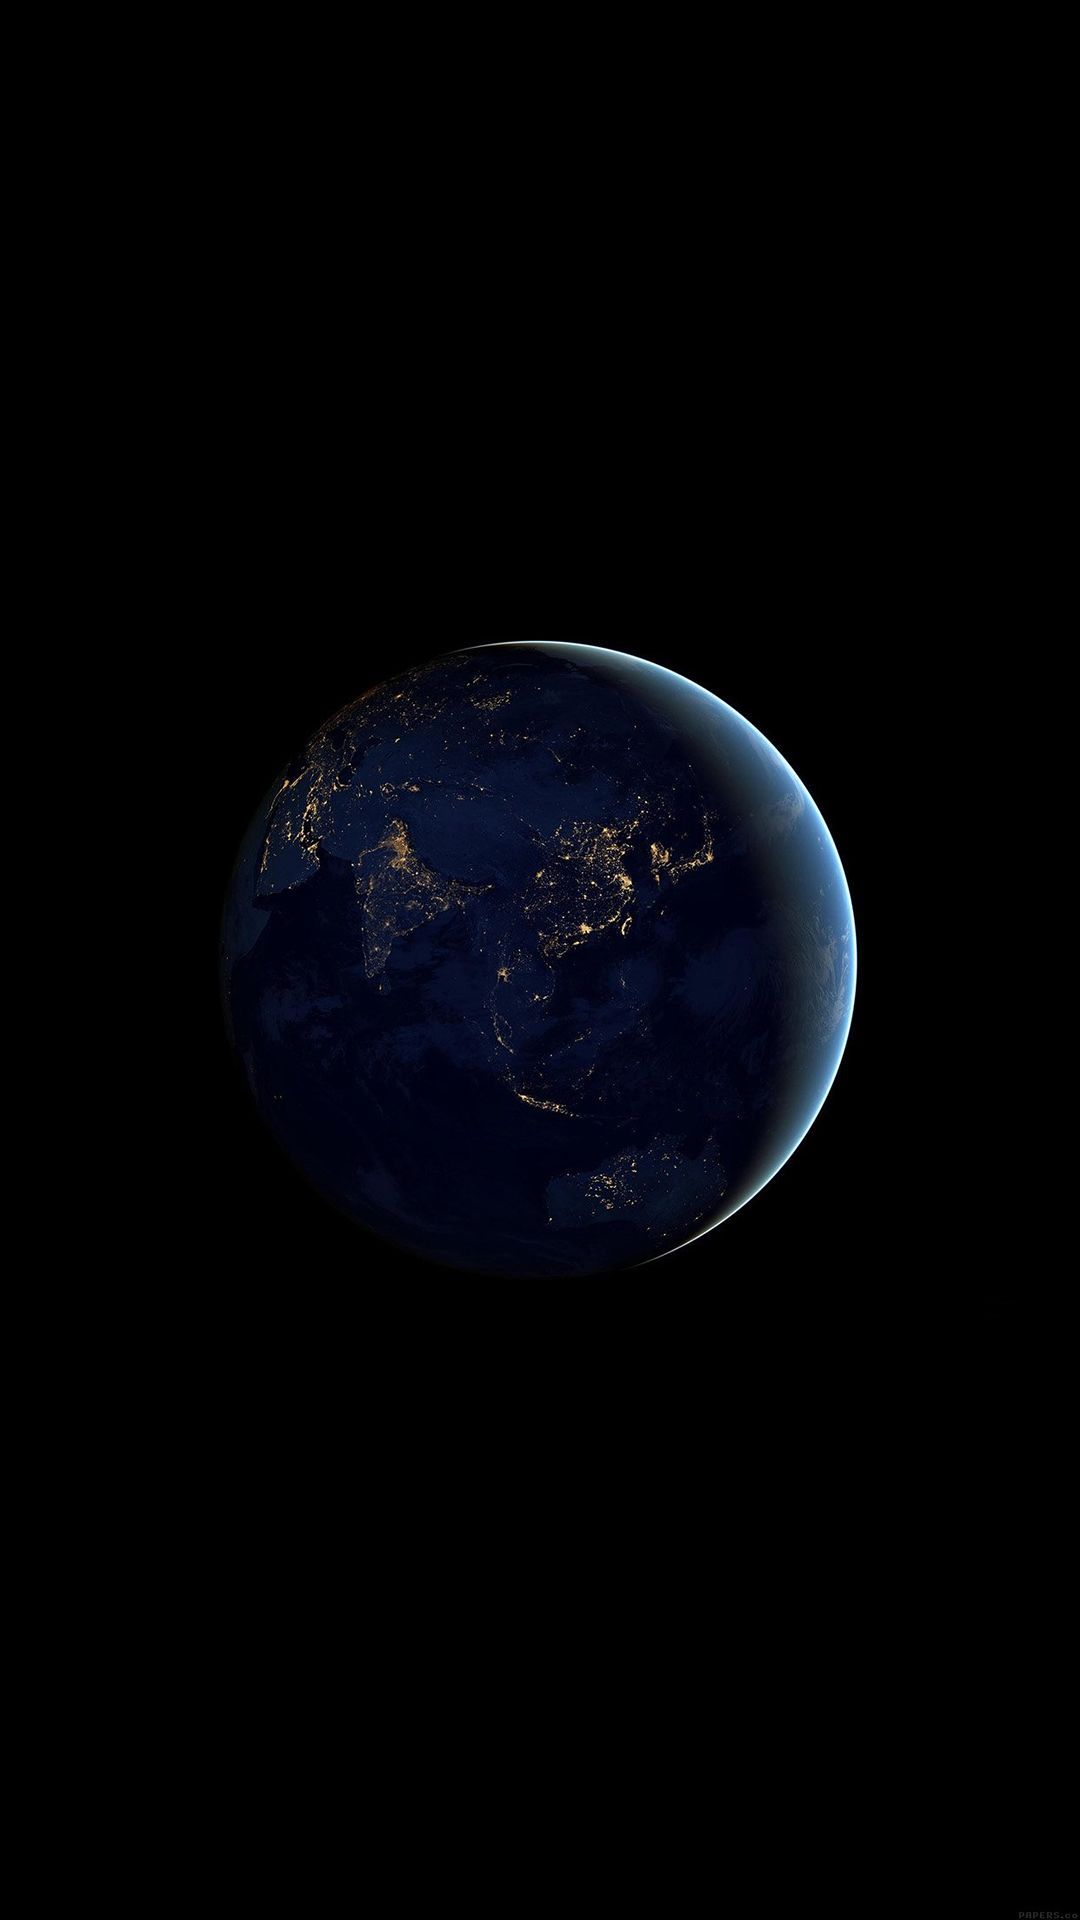 Asia At Night Earth Space Dark iPhone 6 Wallpaper Download. iPhone Wallpaper, iPad wallpaper. iPhone wallpaper earth, Android wallpaper black, Wallpaper earth